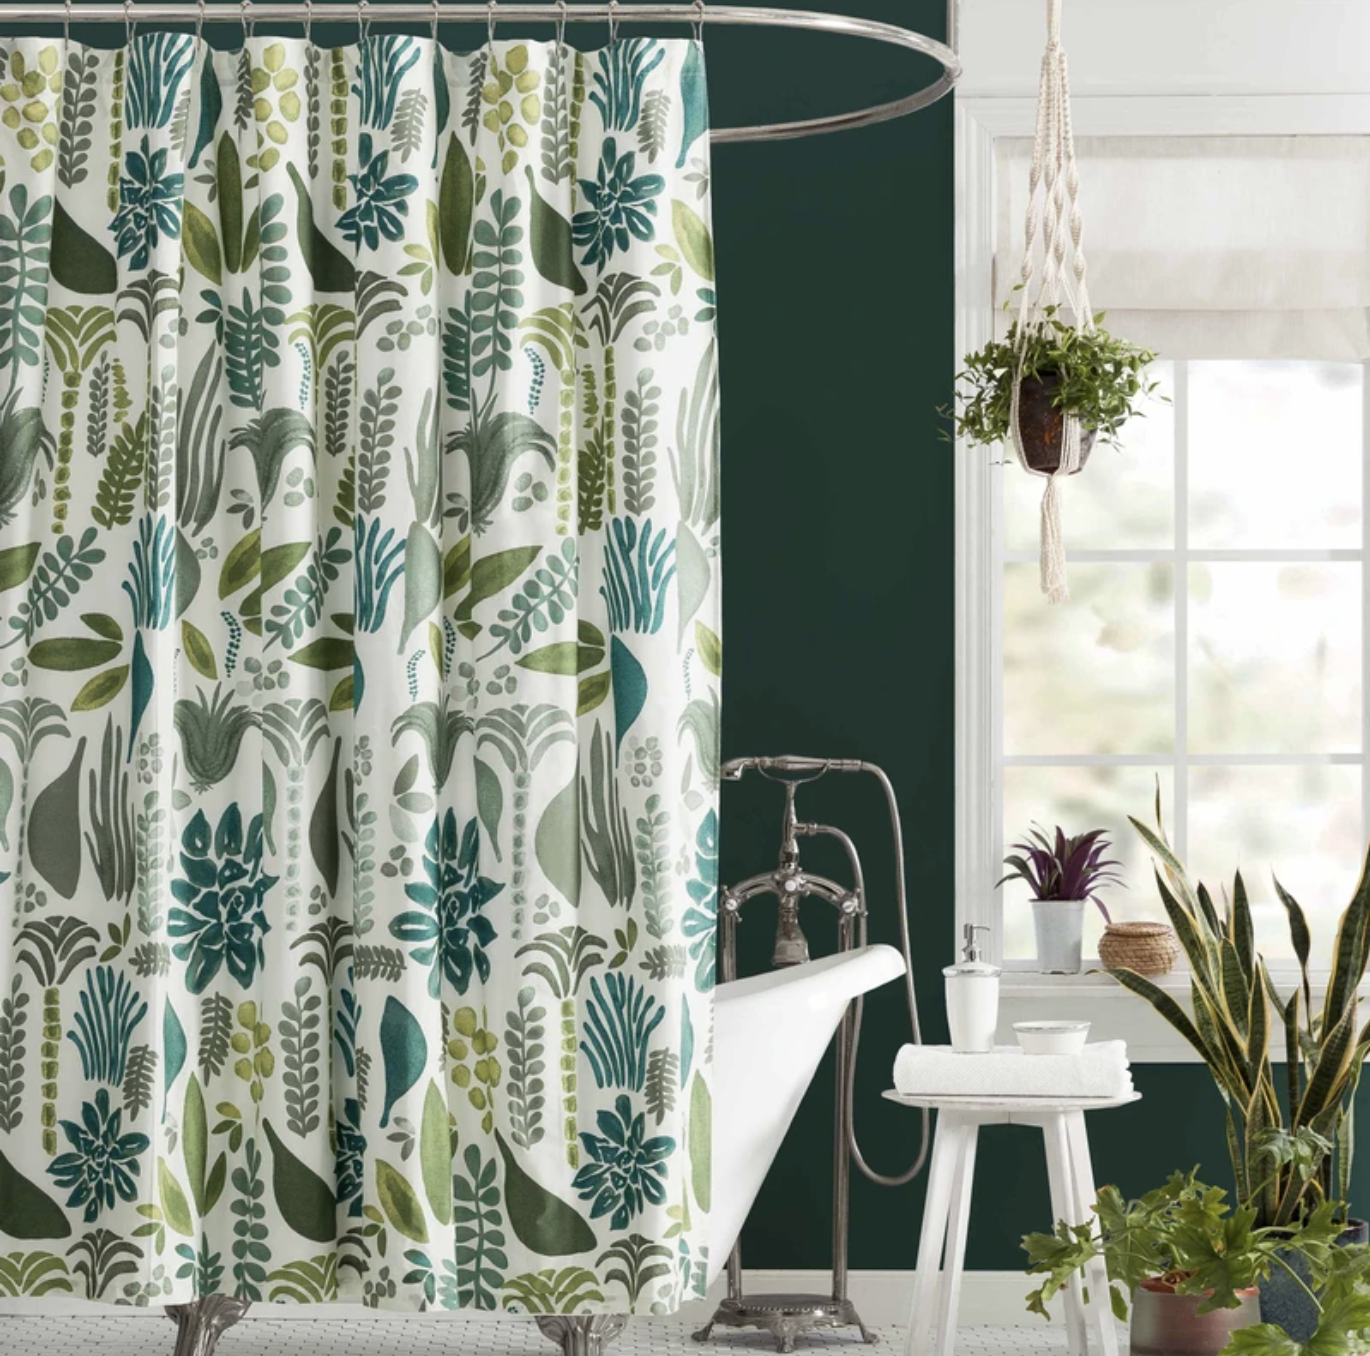 The shower curtain covered in a leafy pattern is shown in a bathroom